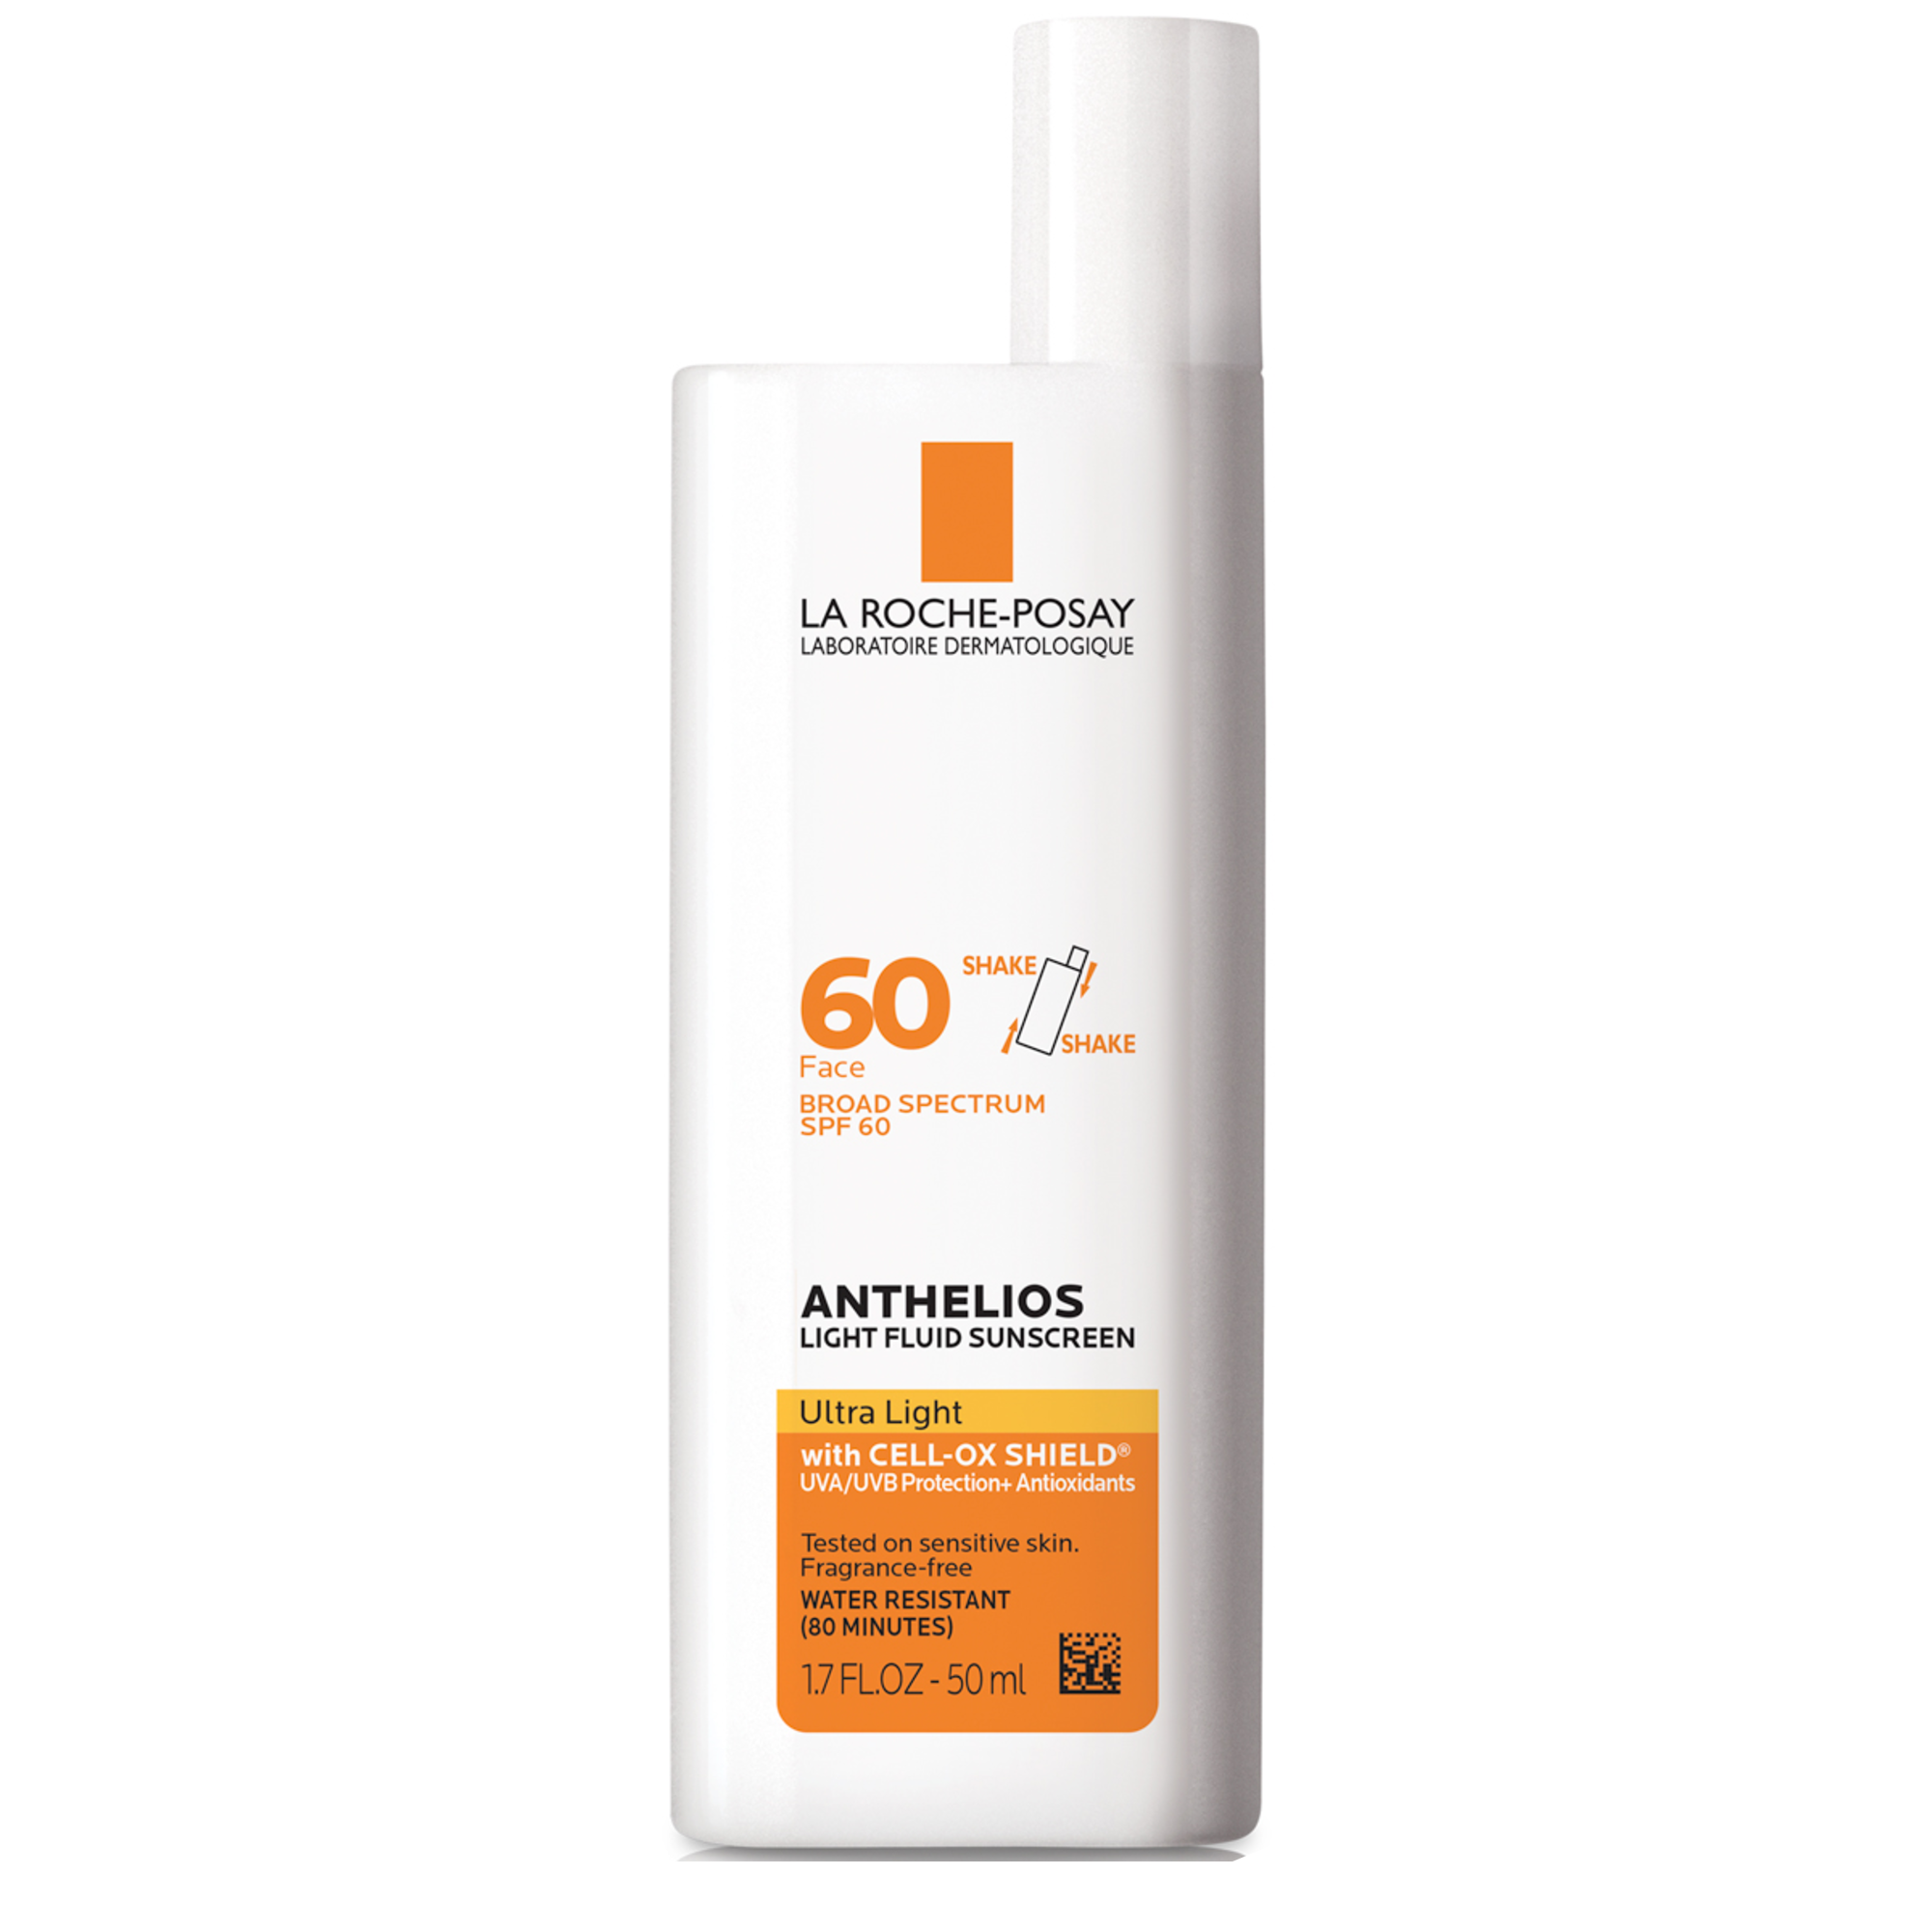 A bottle of La Roche-Posay Anthelios Sunscreen